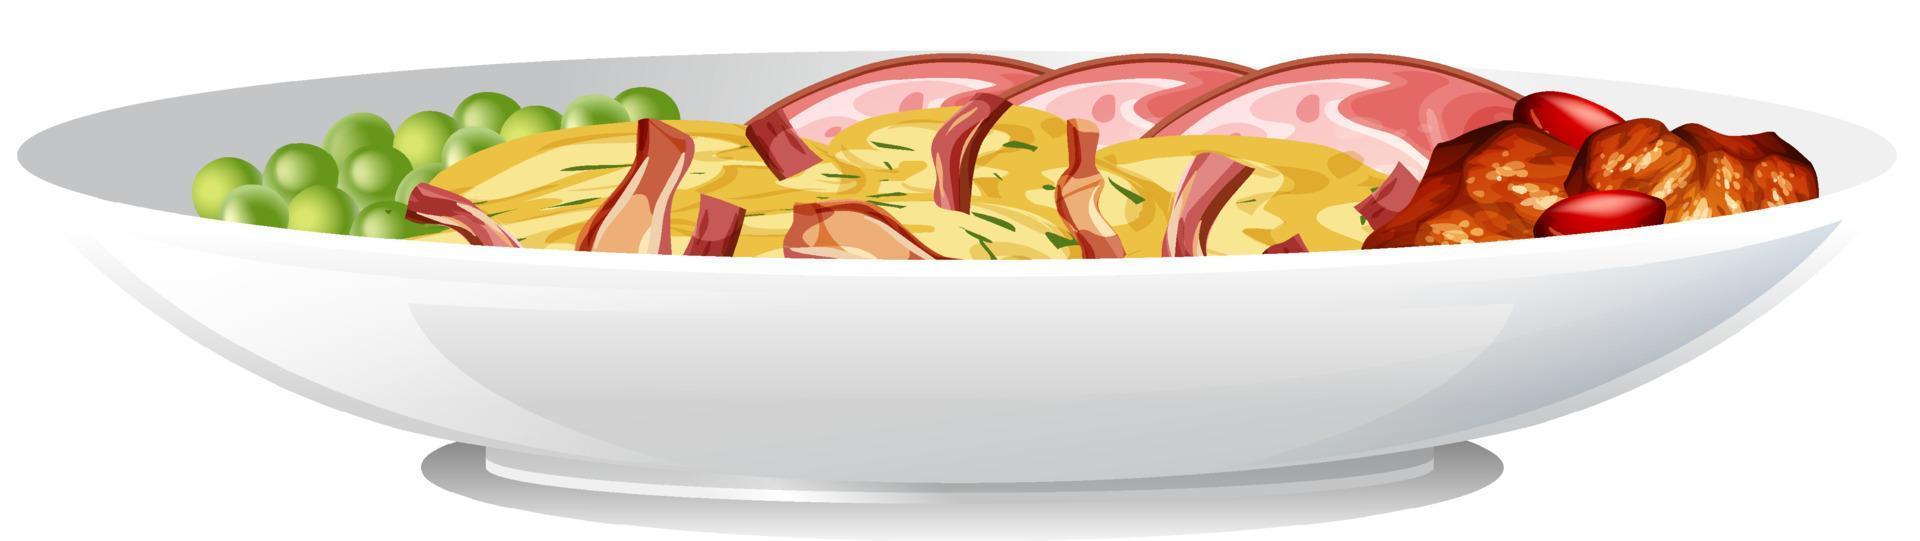 Side view of breakfast bowl isolated vector